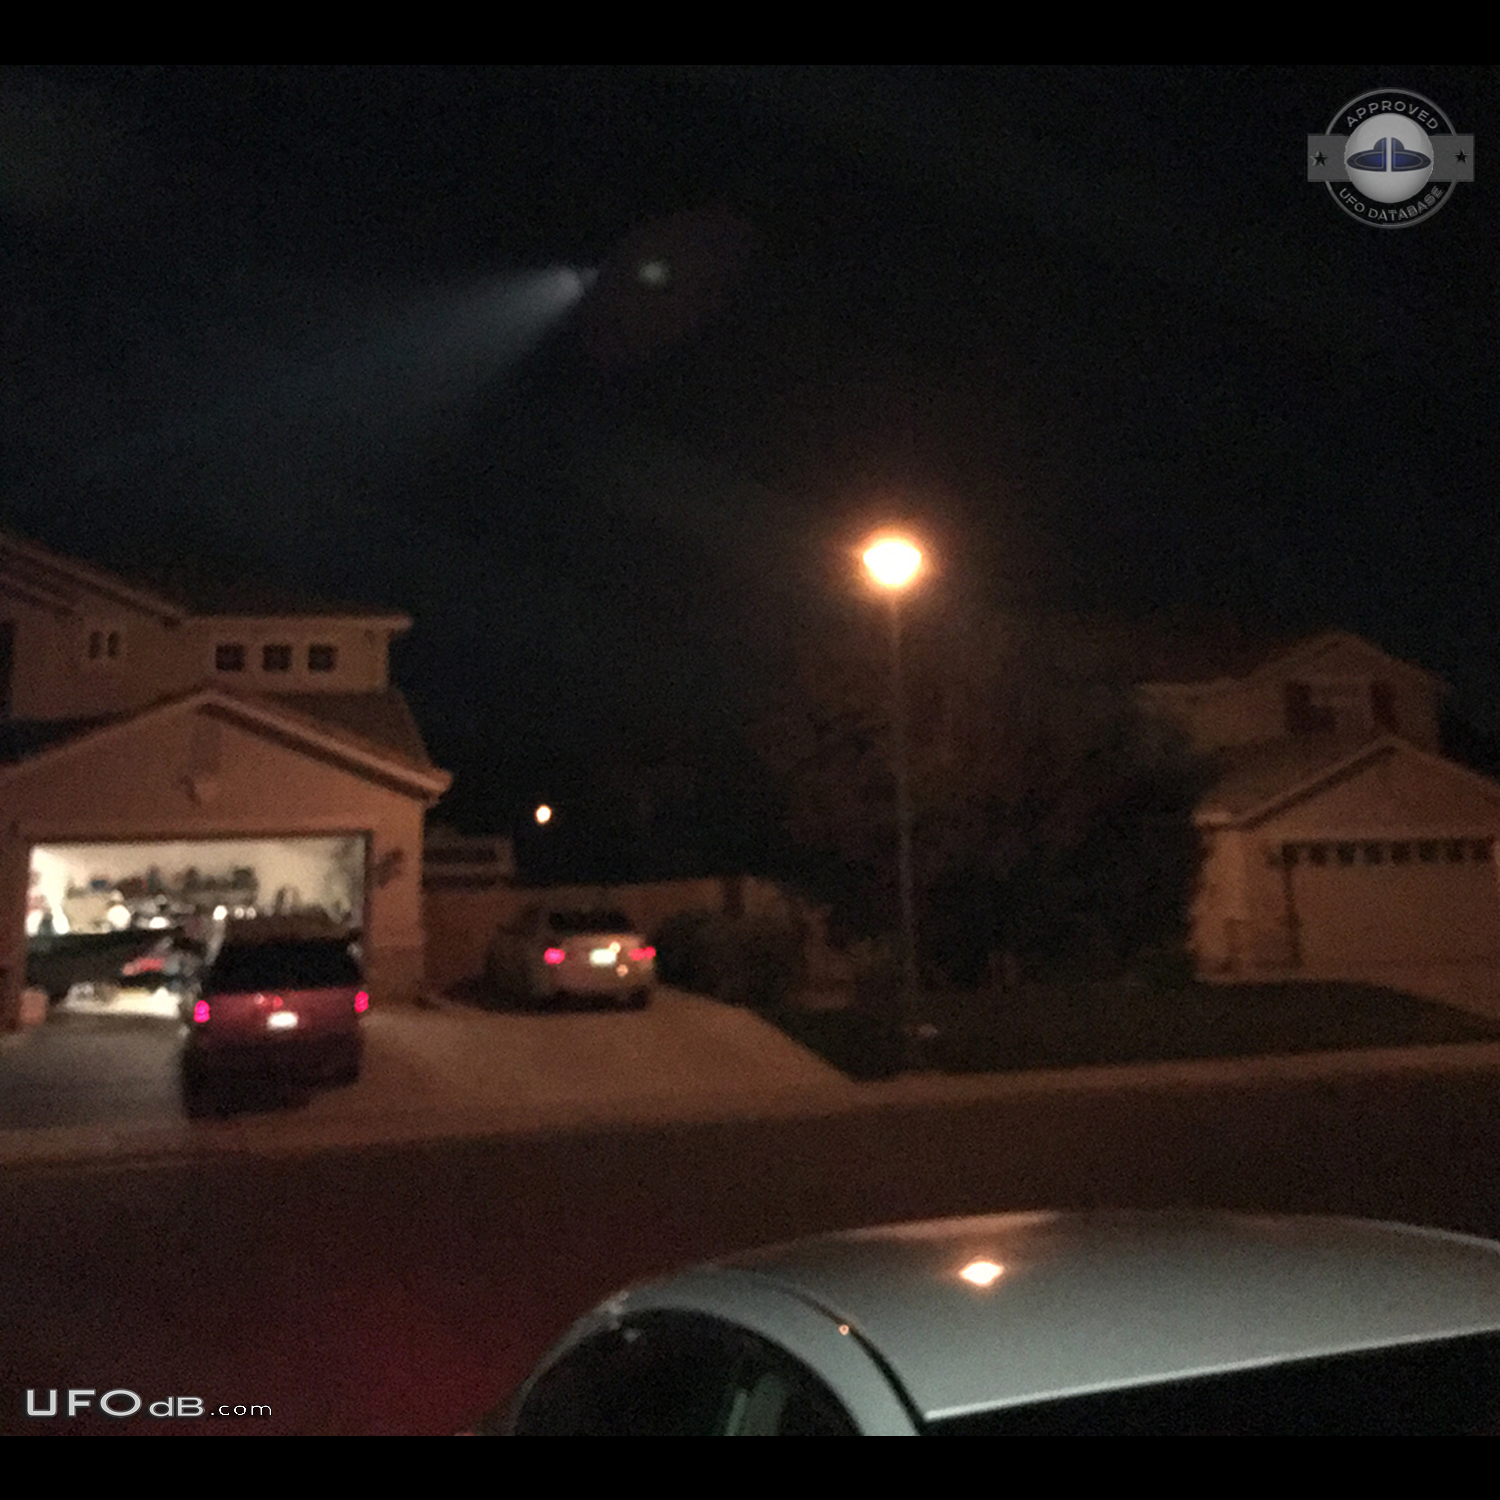 Coming out of my house saw UFO in the sky with a long beam of light -  UFO Picture #758-1